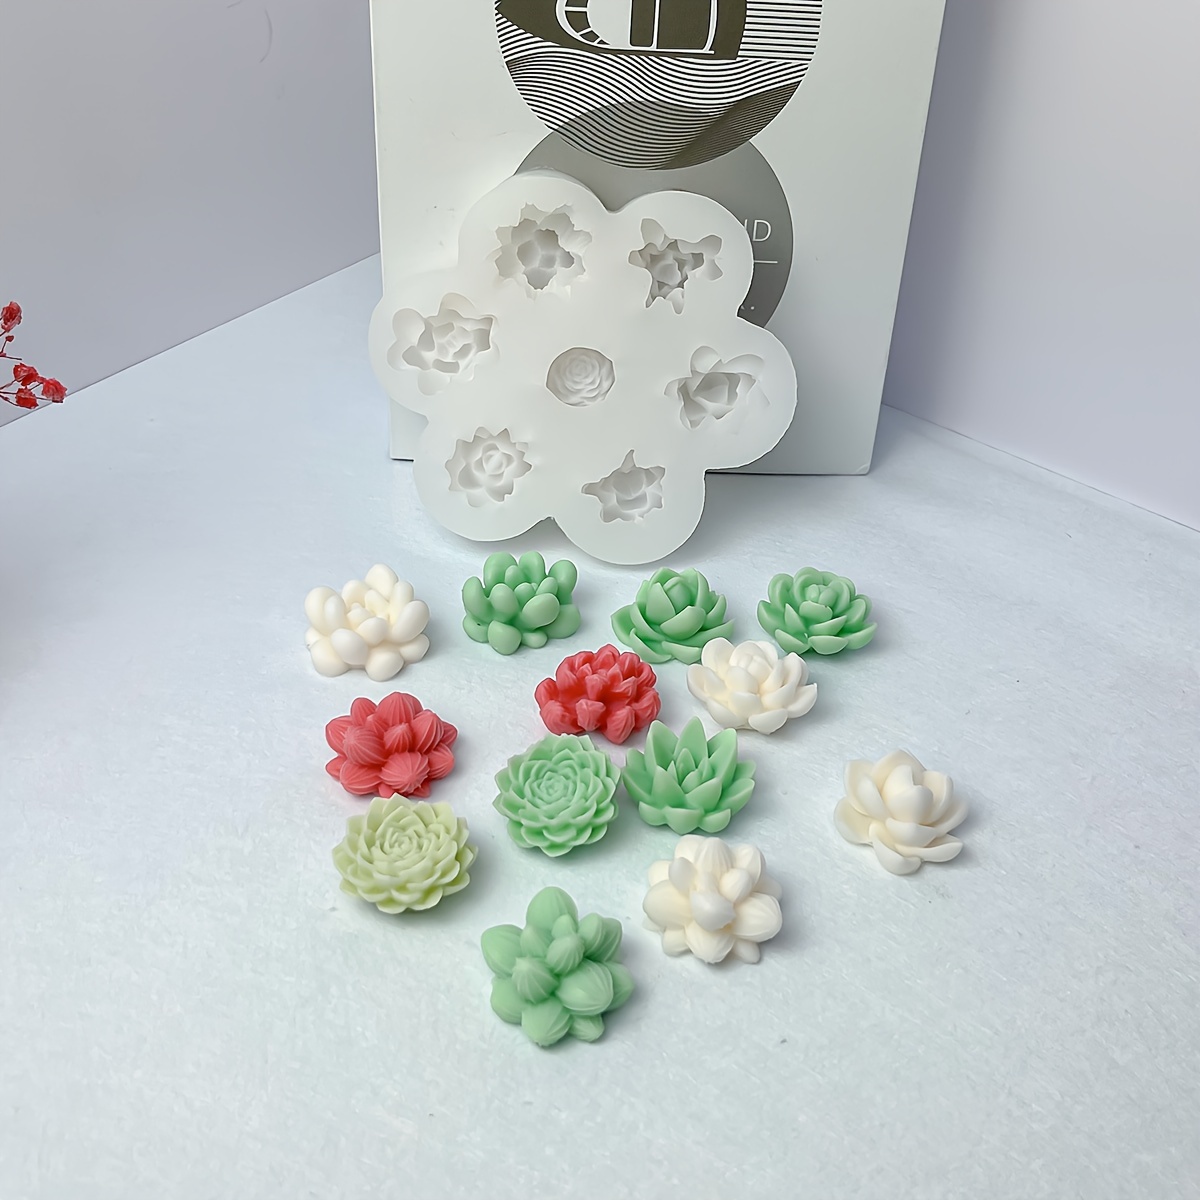 

Succulent & Cactus Silicone Mold Set - 7 Unique Floral Designs For Candles, Soaps, And Aromatherapy Crafts